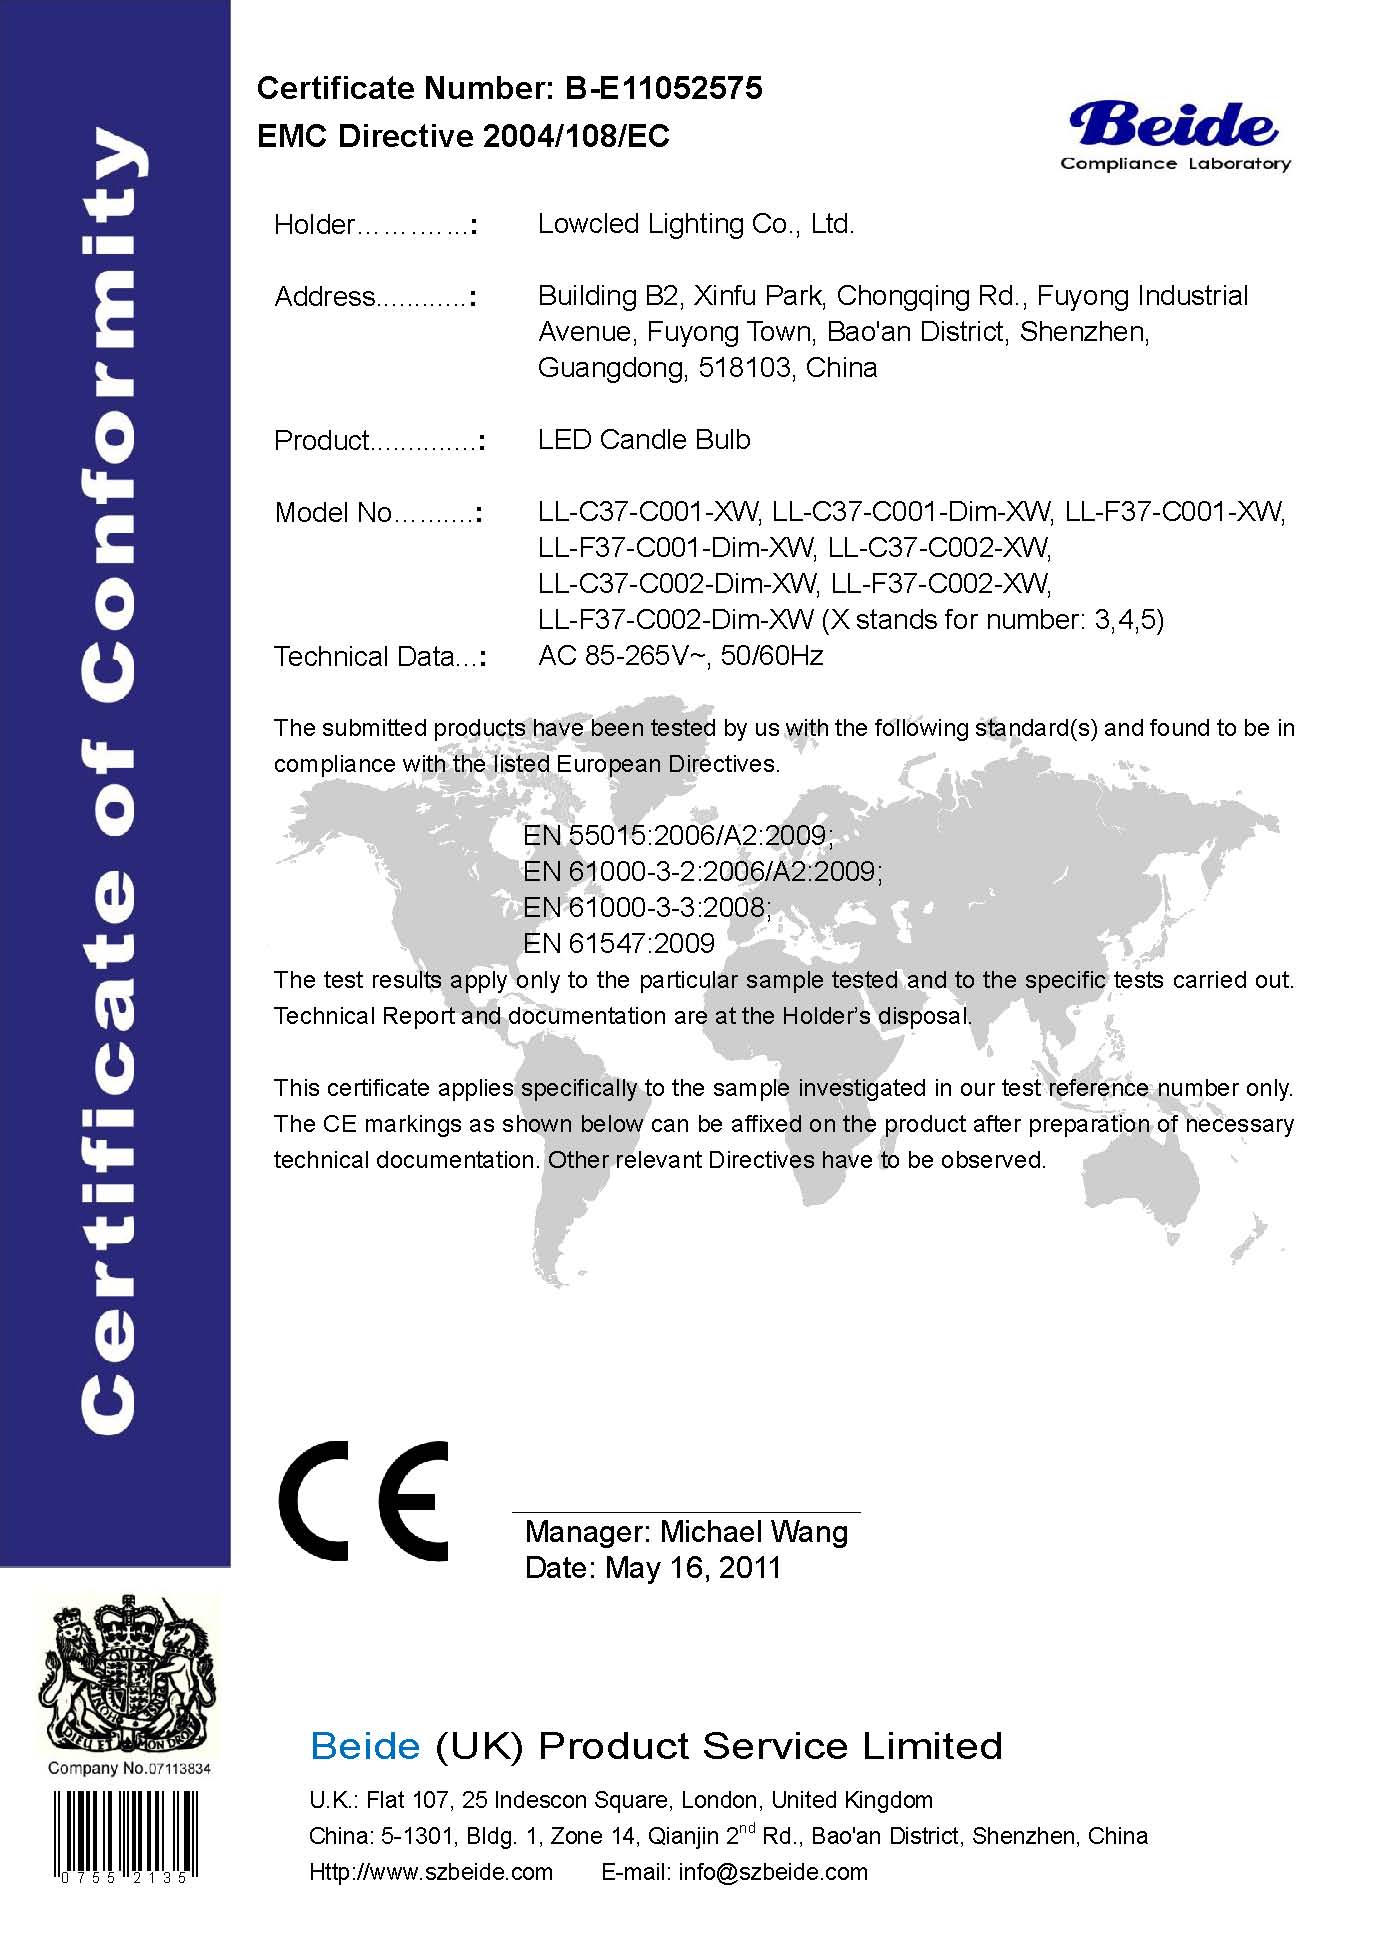 Lowcled Candle bulb CE-EMC Certificate